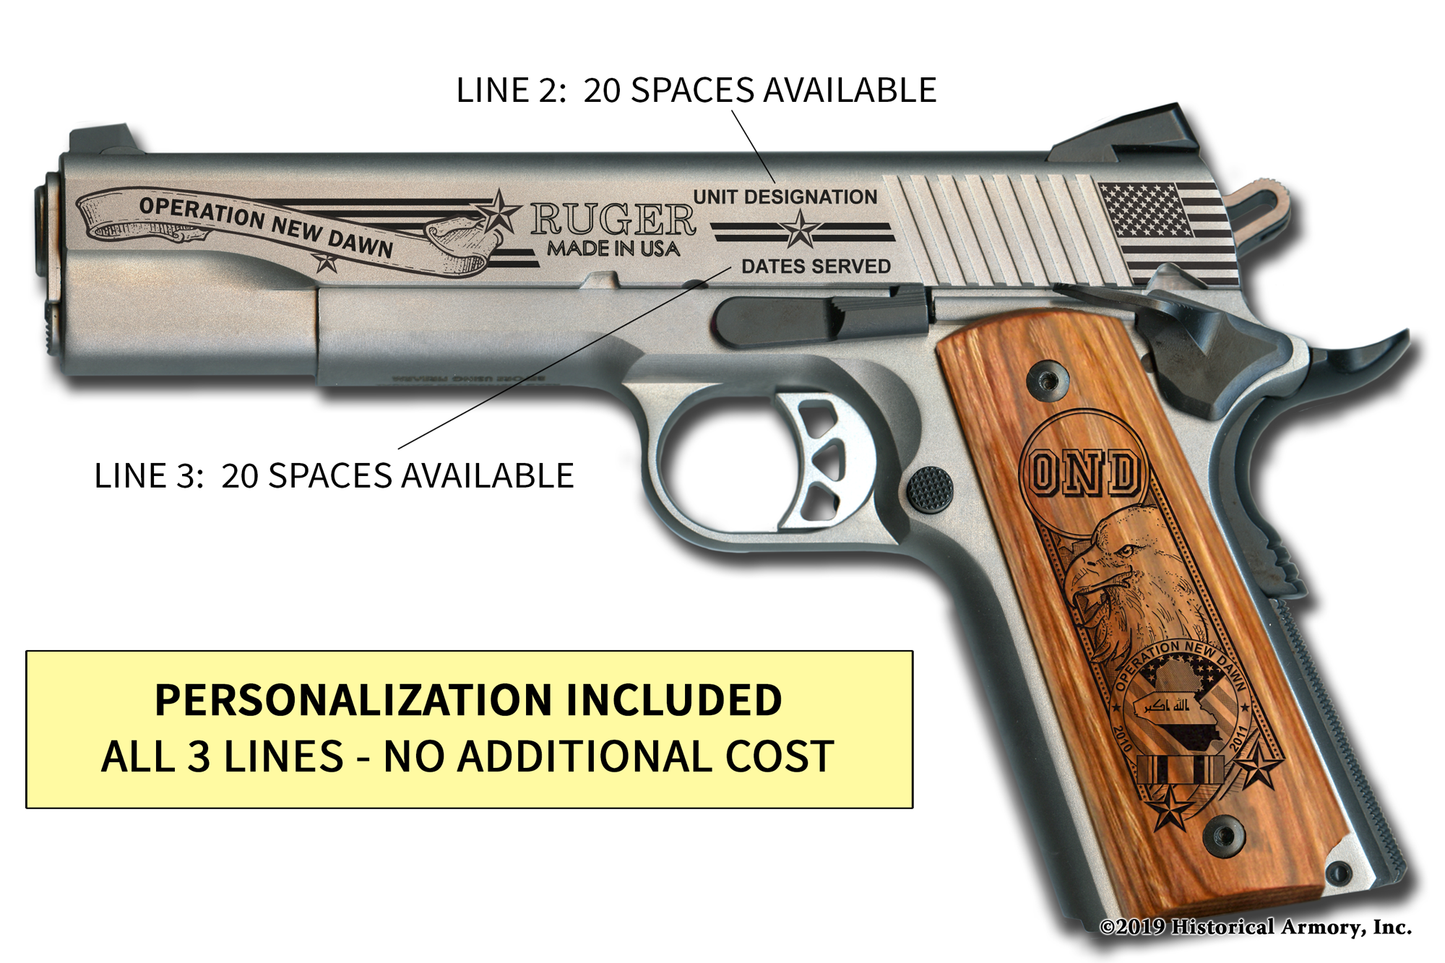 Operation New Dawn Edition 1911 engraved pistol